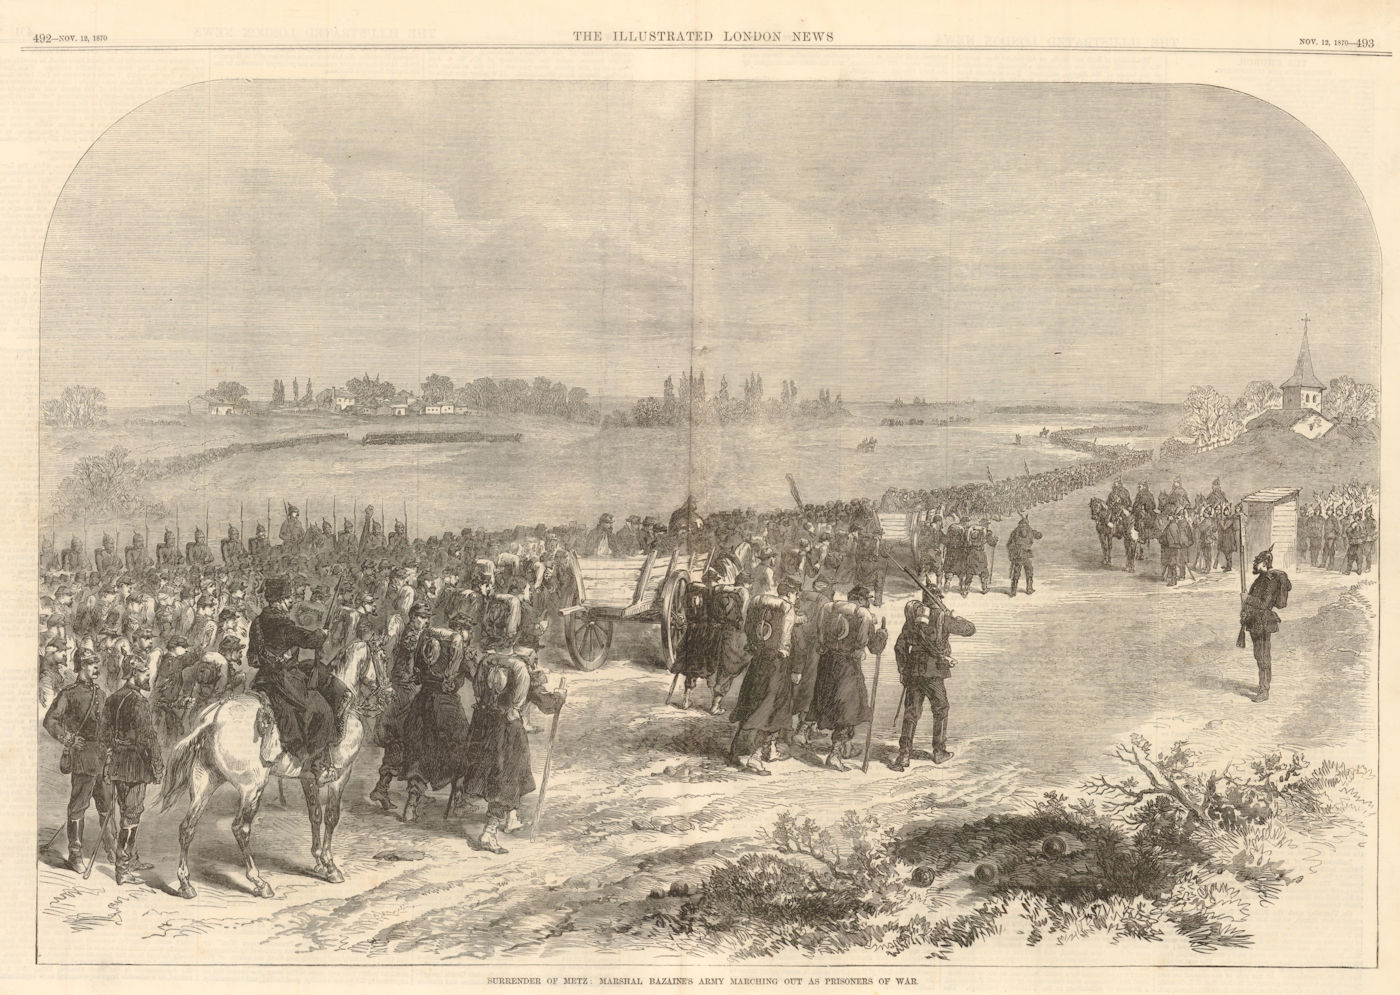 Franco-Prussian War: Surrender of Metz: Marshal Bazaine's army as PoWs 1870